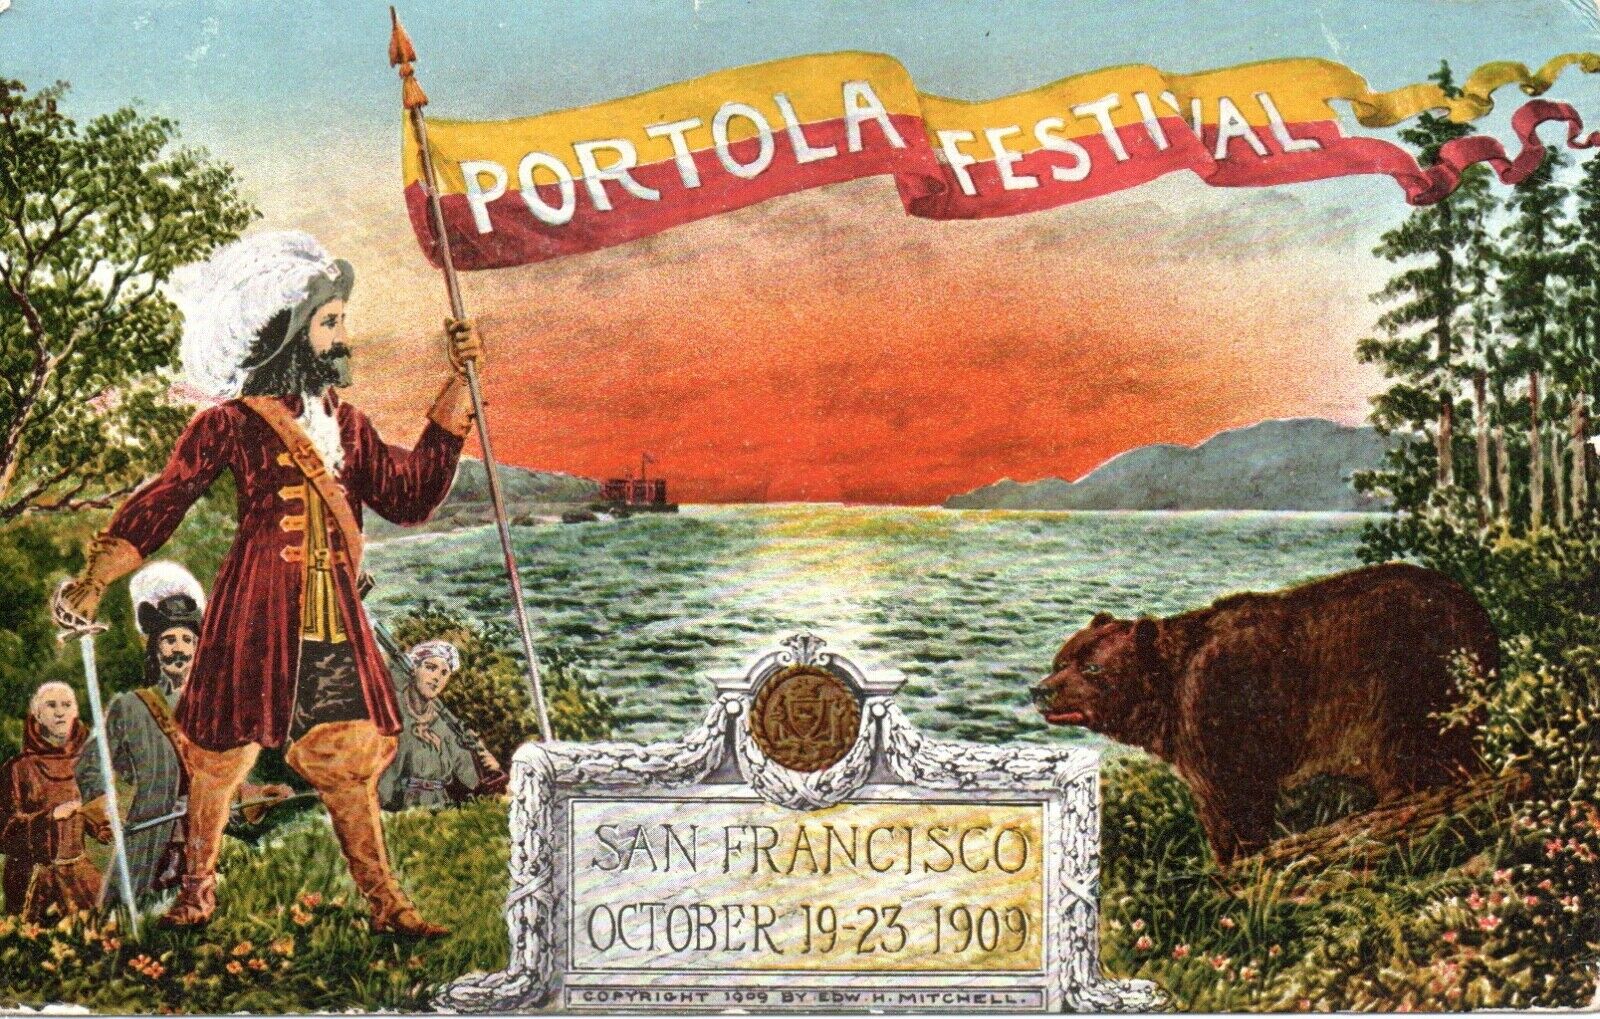 1909 Portola Festival postcard promoting S.F.\'s recovery from earth quake